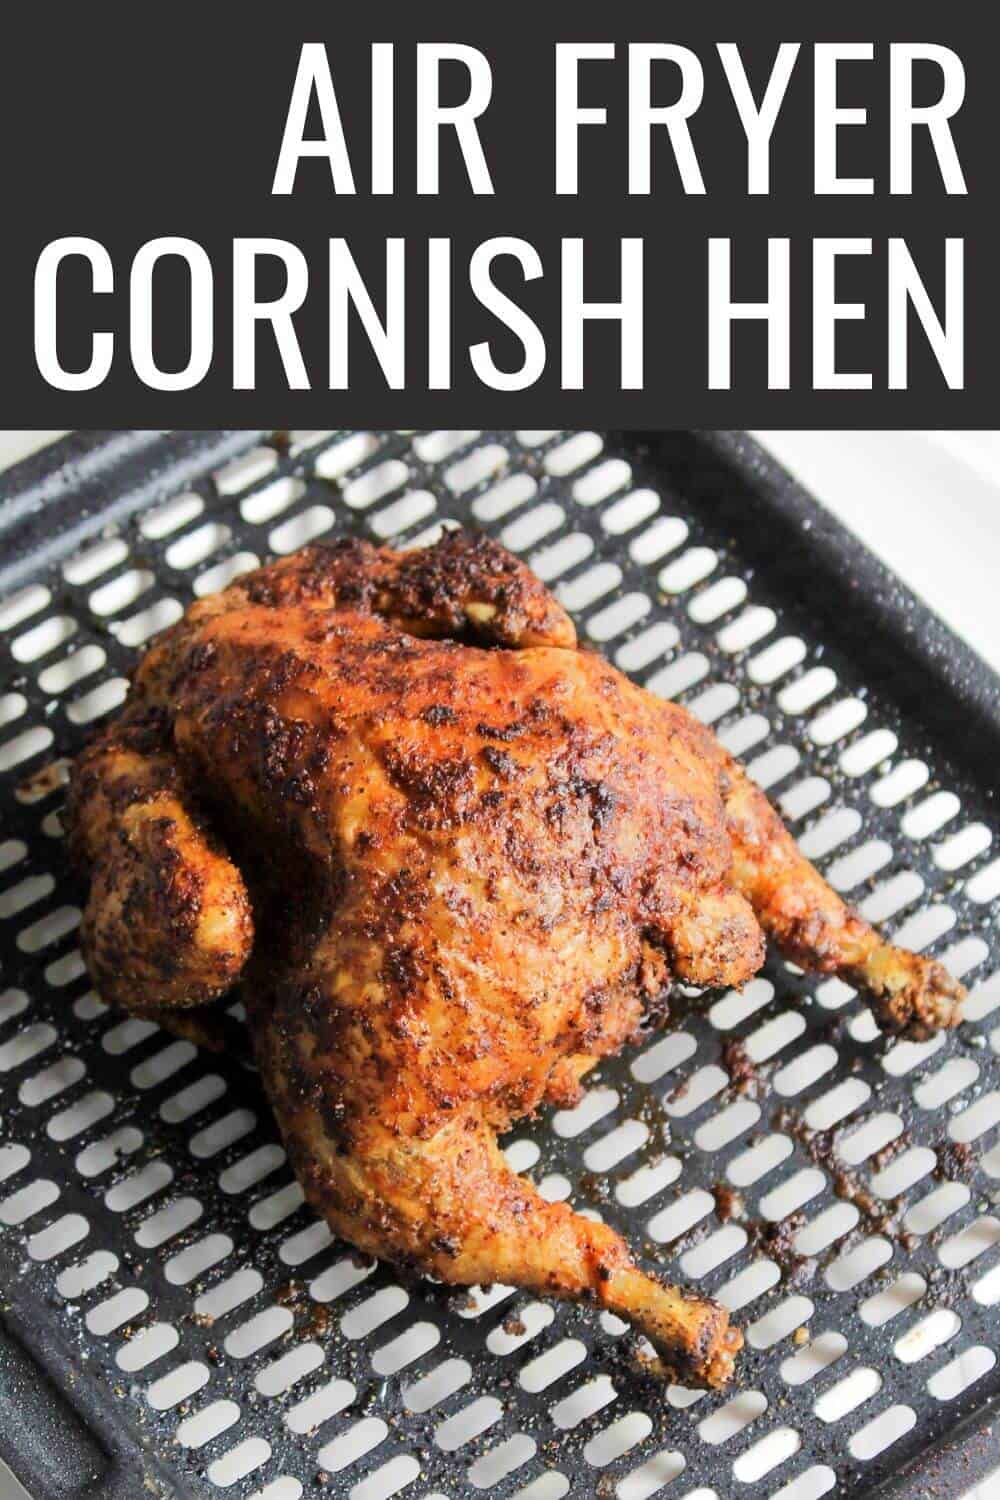 Air fryer cornish hen with recipe title text overlay.